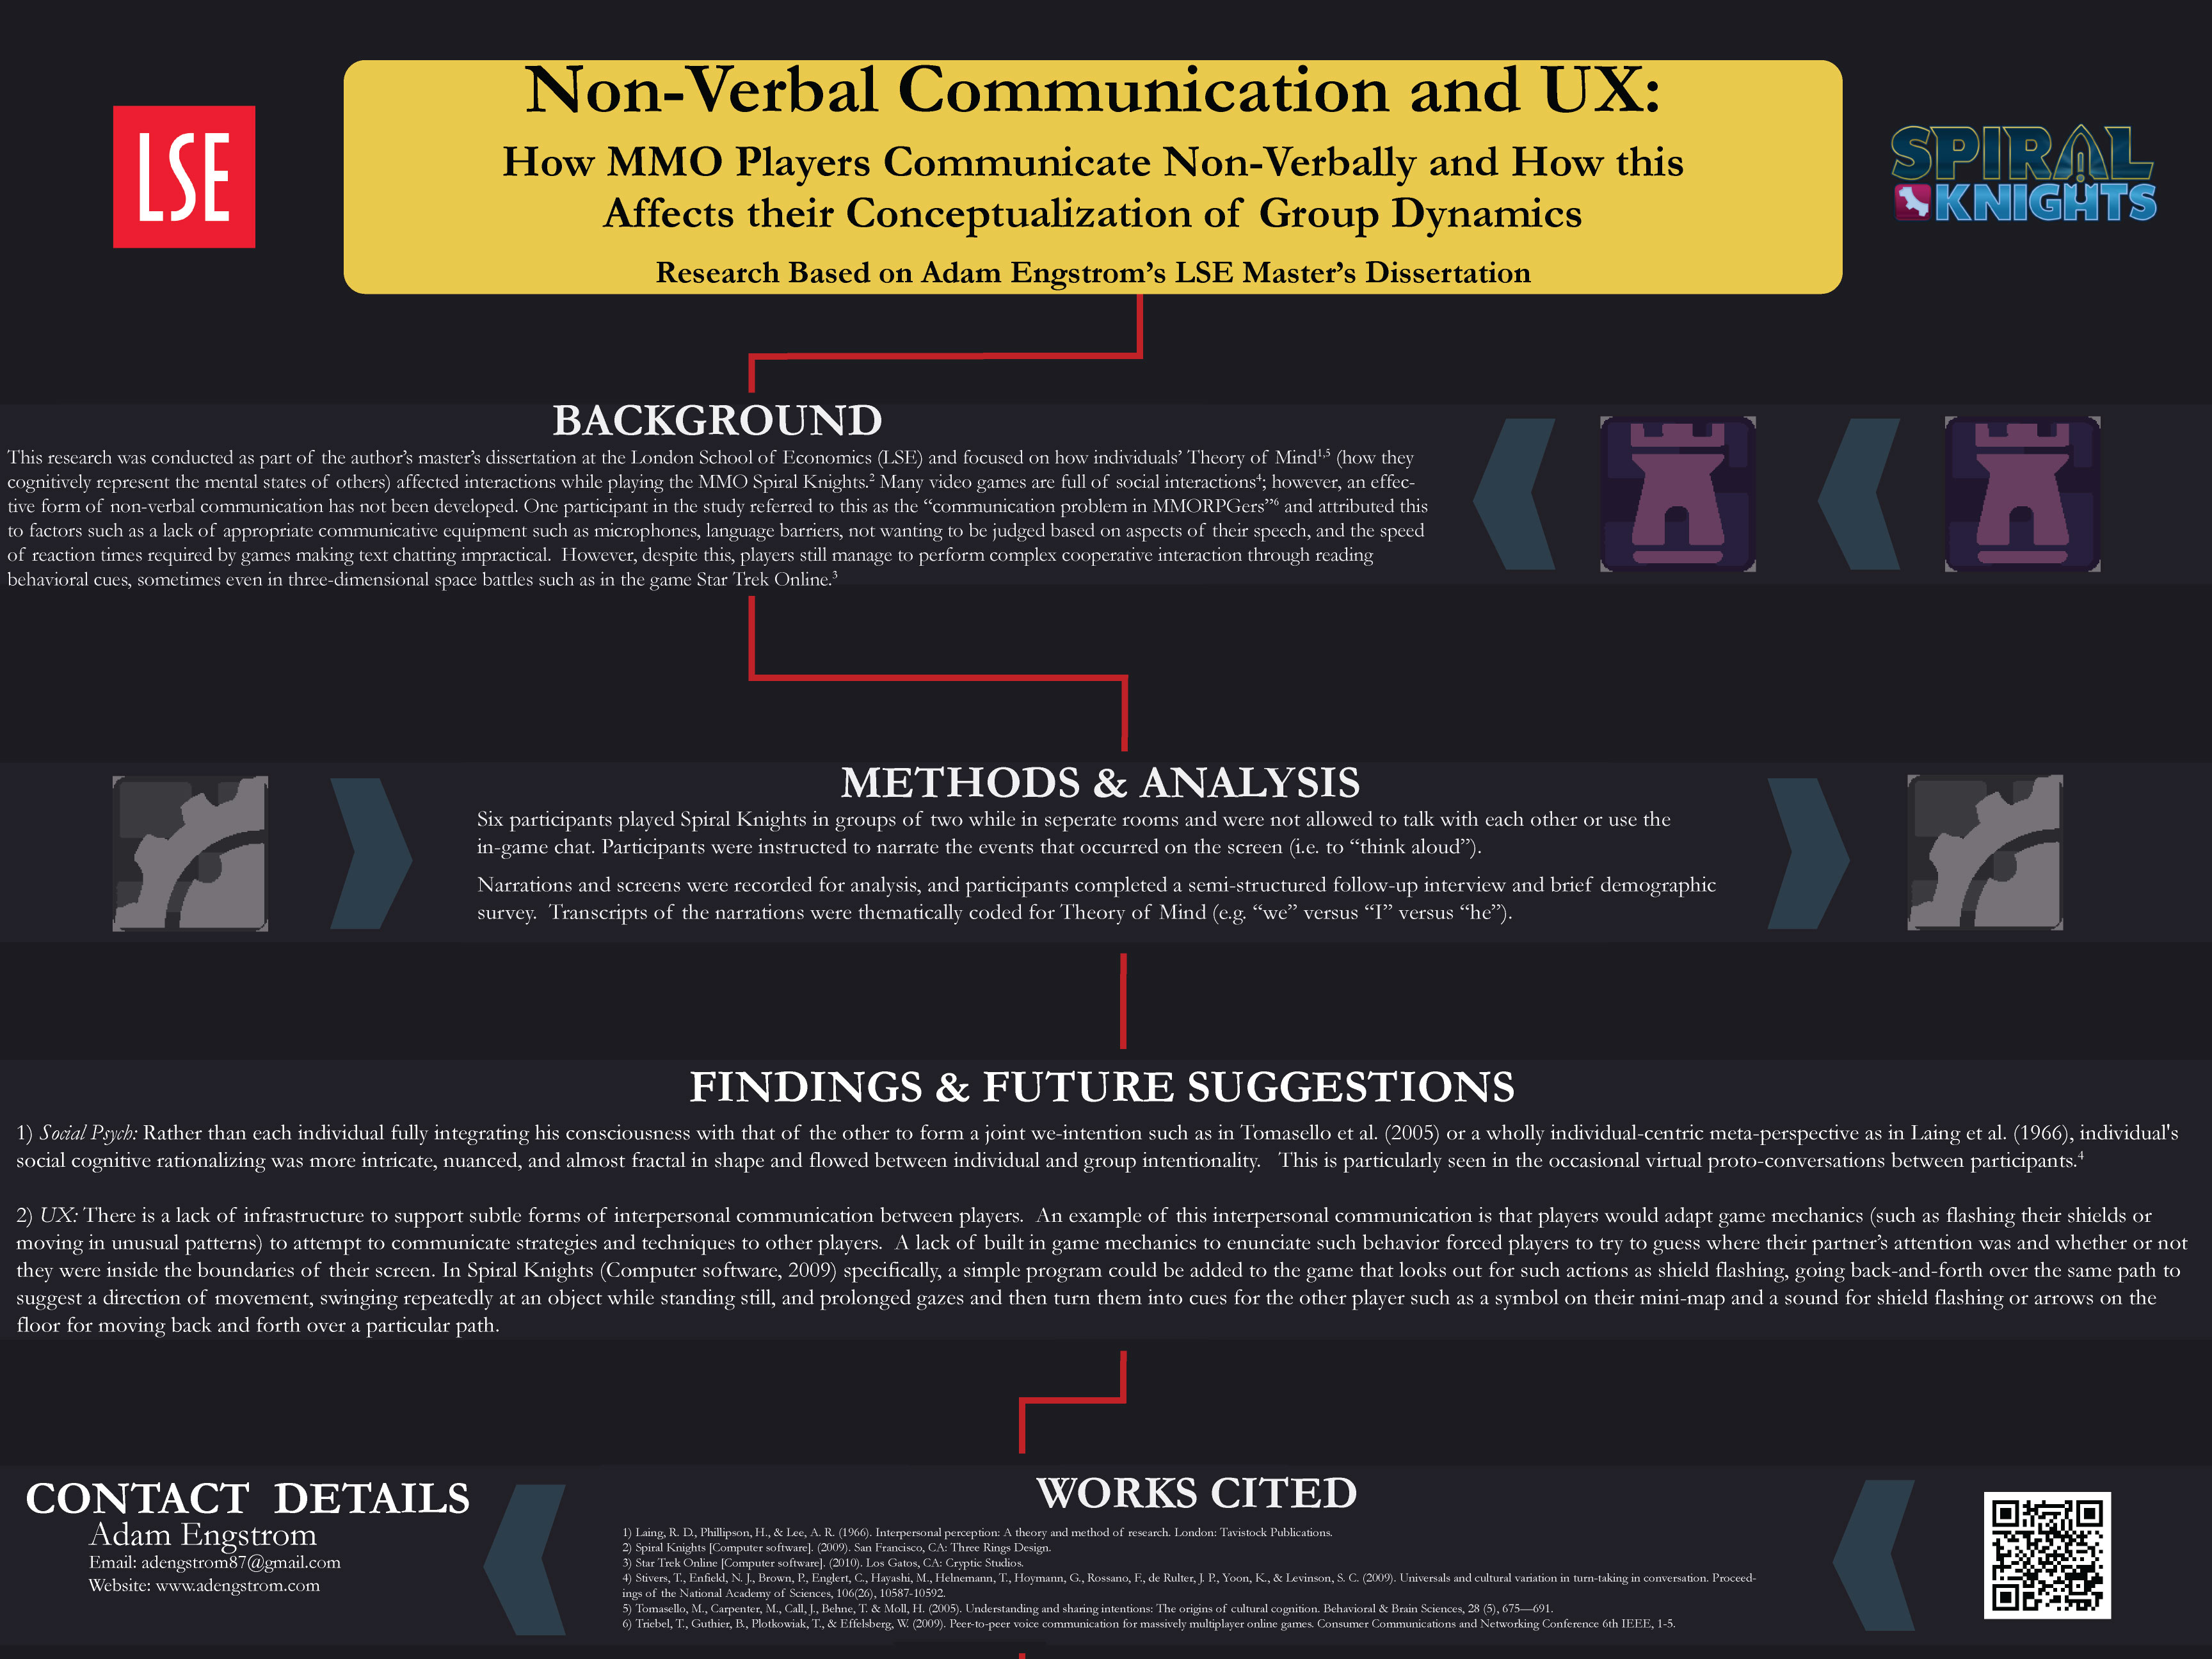 Image of my poster I presented at the Games User Research Summit in 2016.